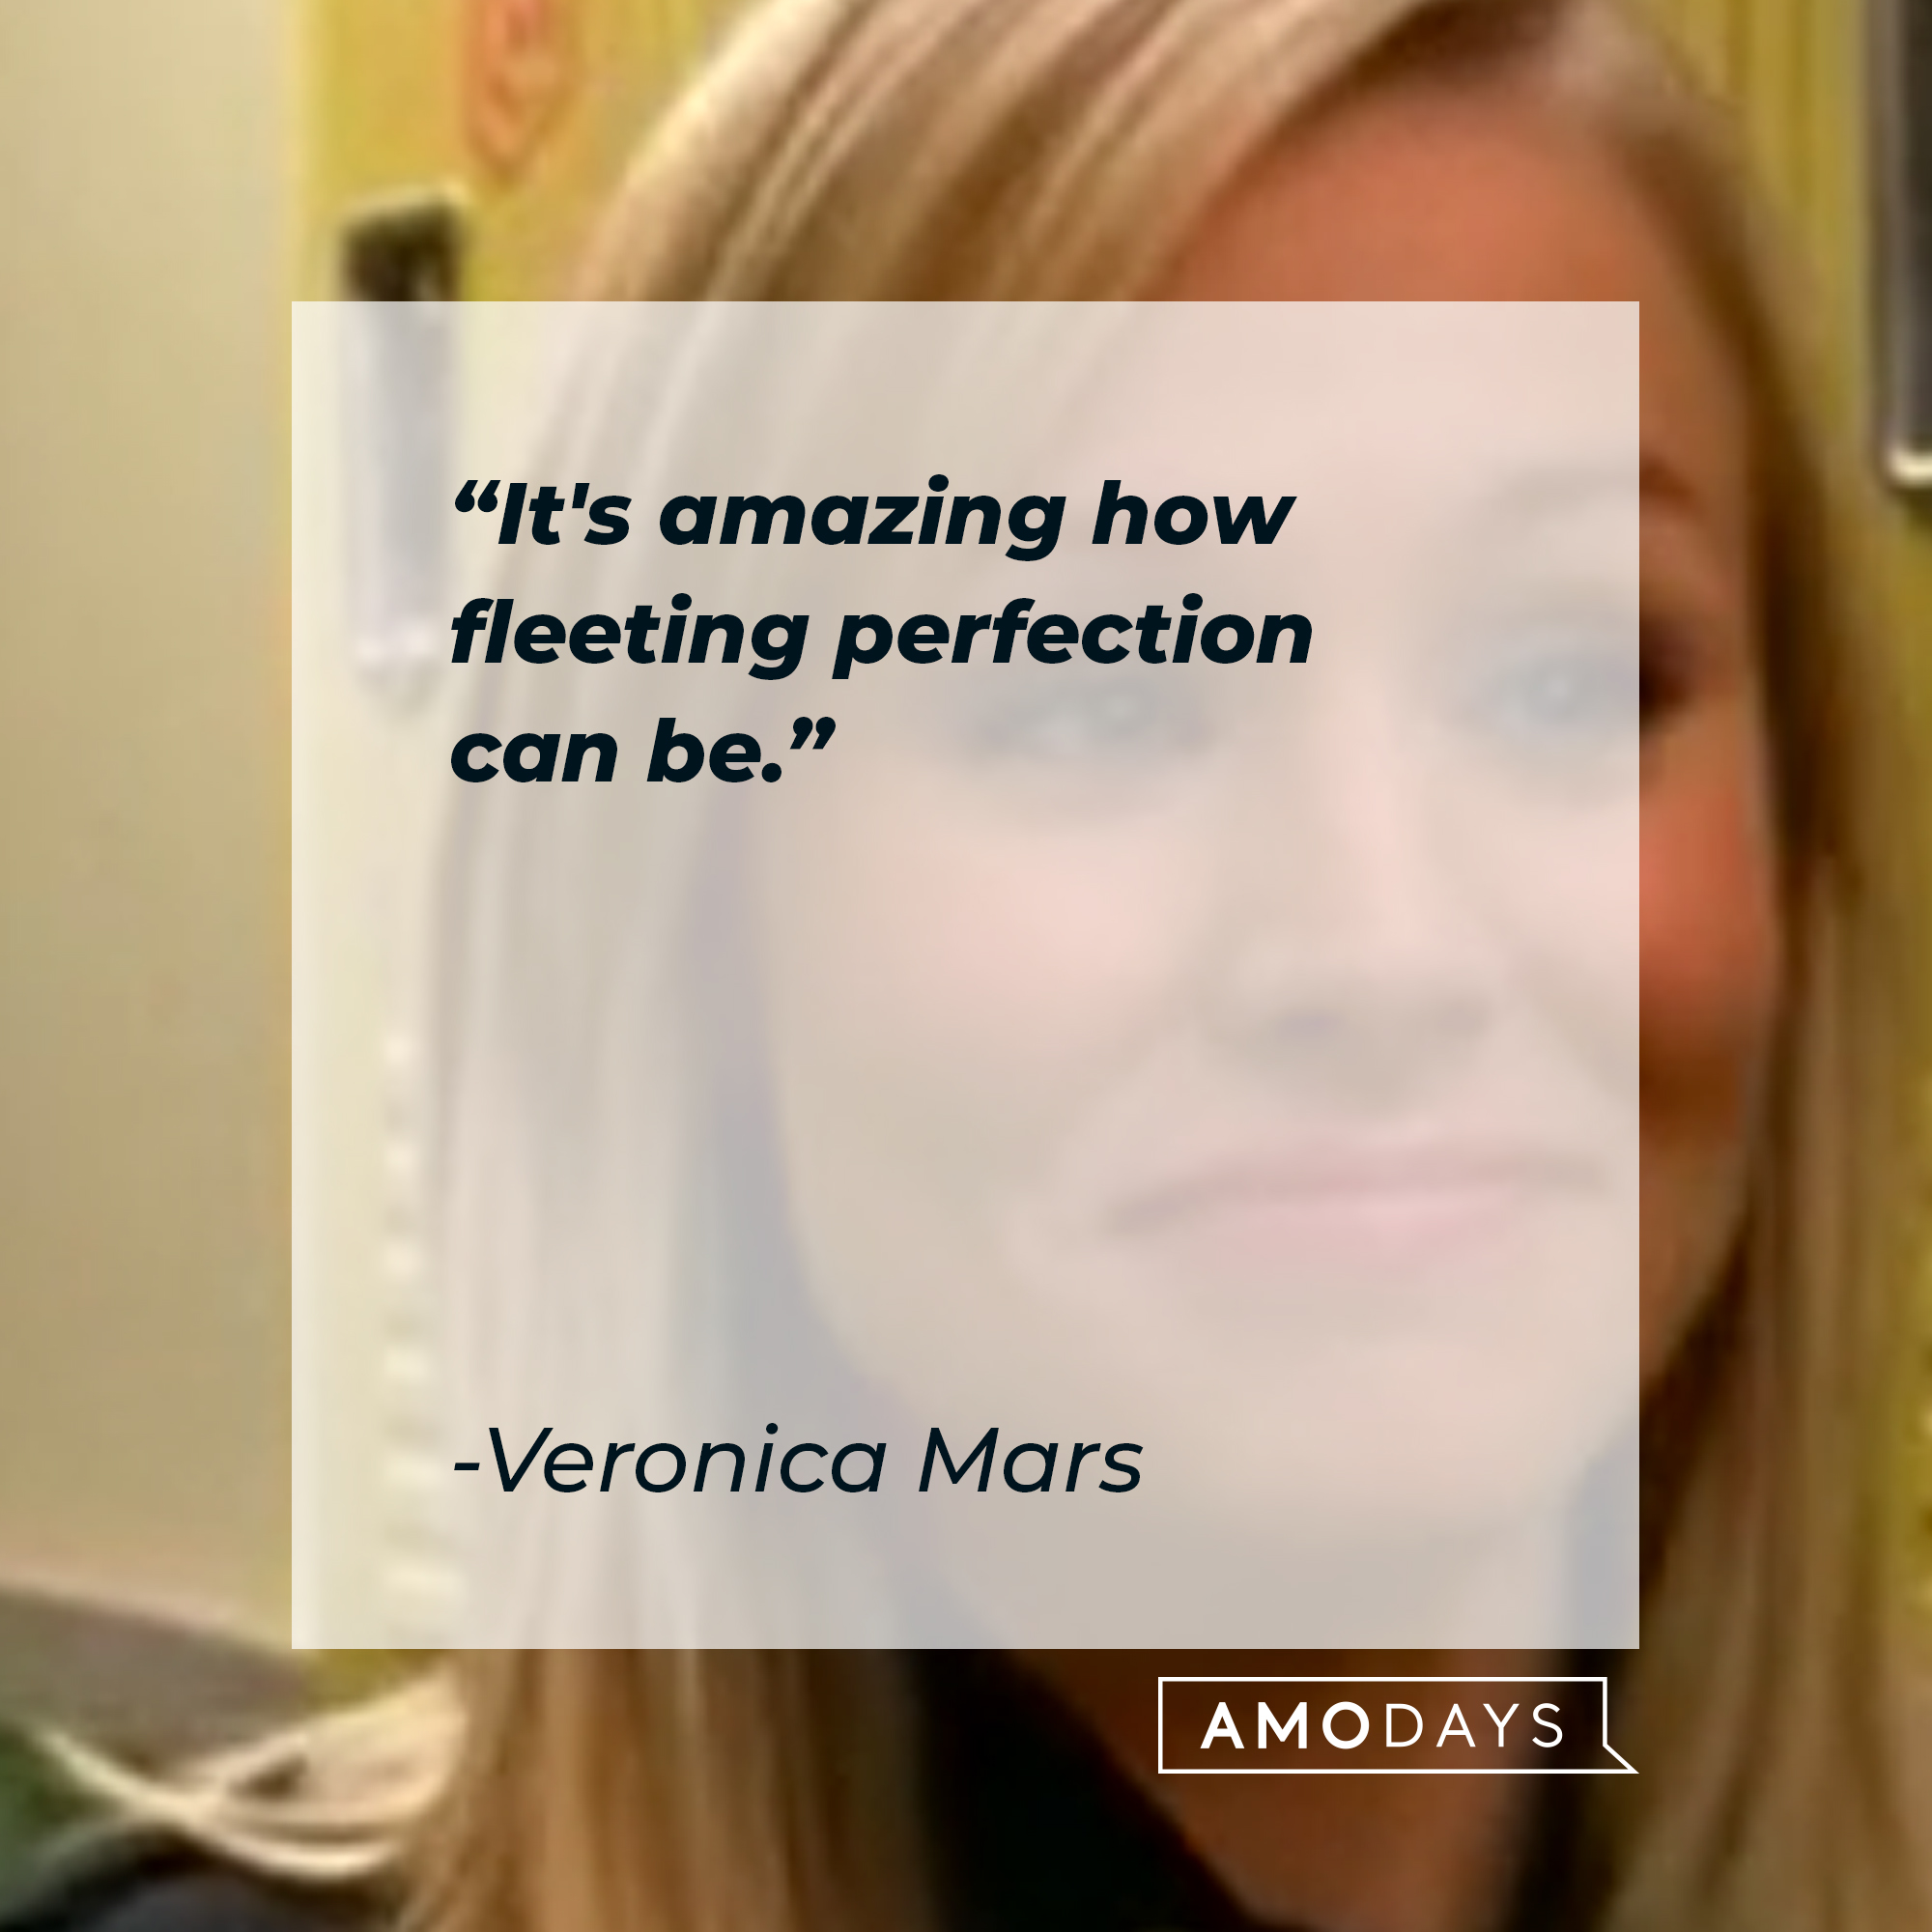 Veronica Mars' quote: "It's amazing how fleeting perfection can be." | Source: facebook.com/VeronicaMars